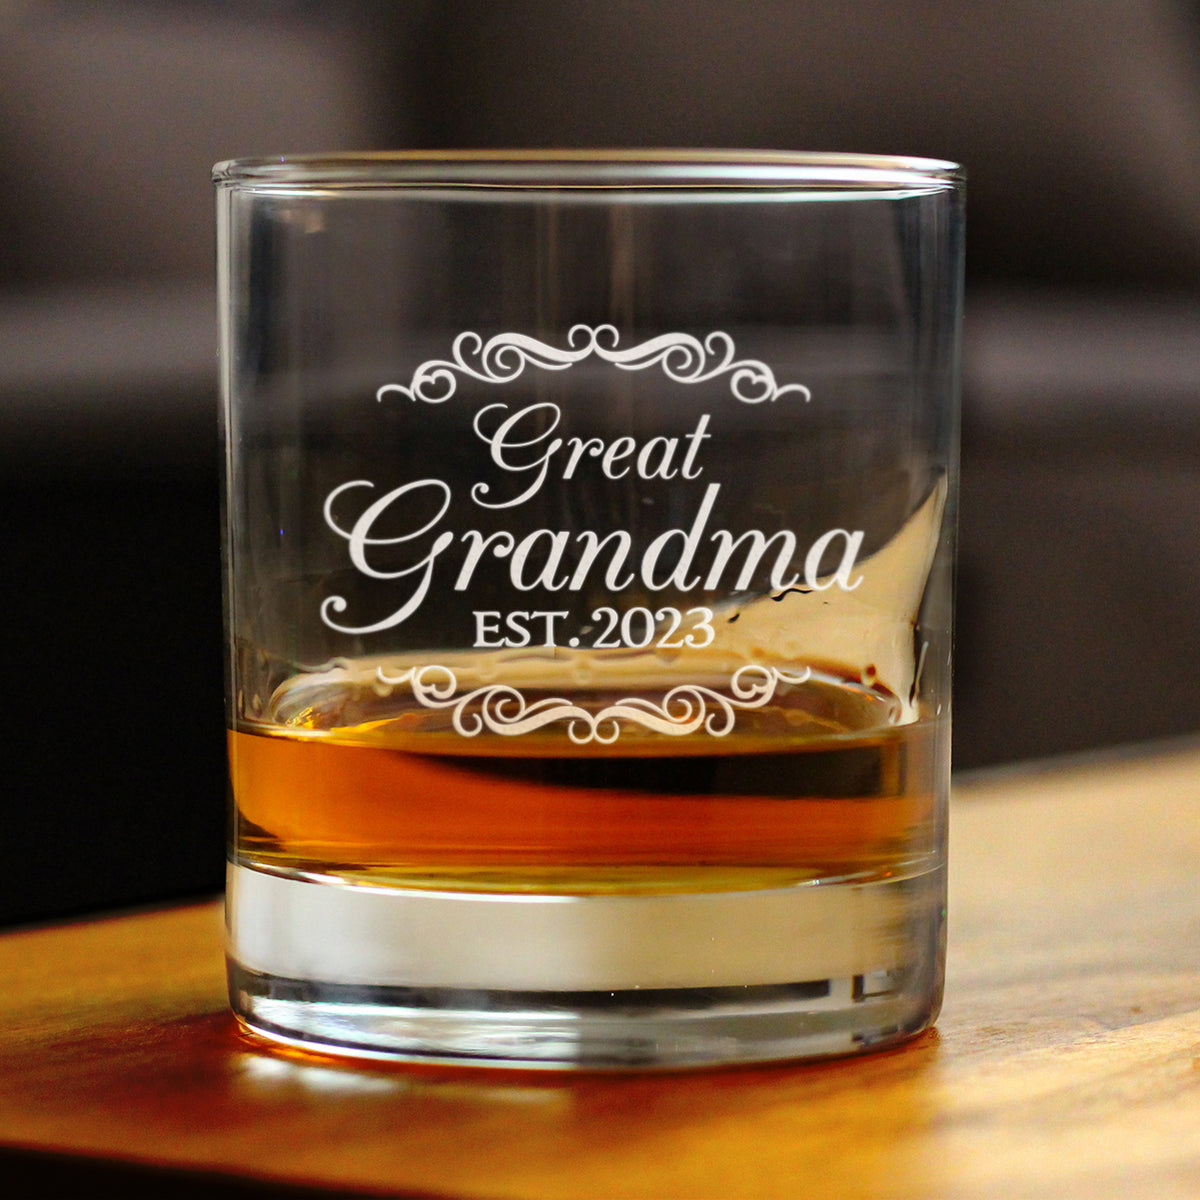 Great Grandma Est 2023 - New Great Grandmother Whiskey Rocks Glass Gift for First Time Great Grandparents - Decorative 10.25 Oz Glasses